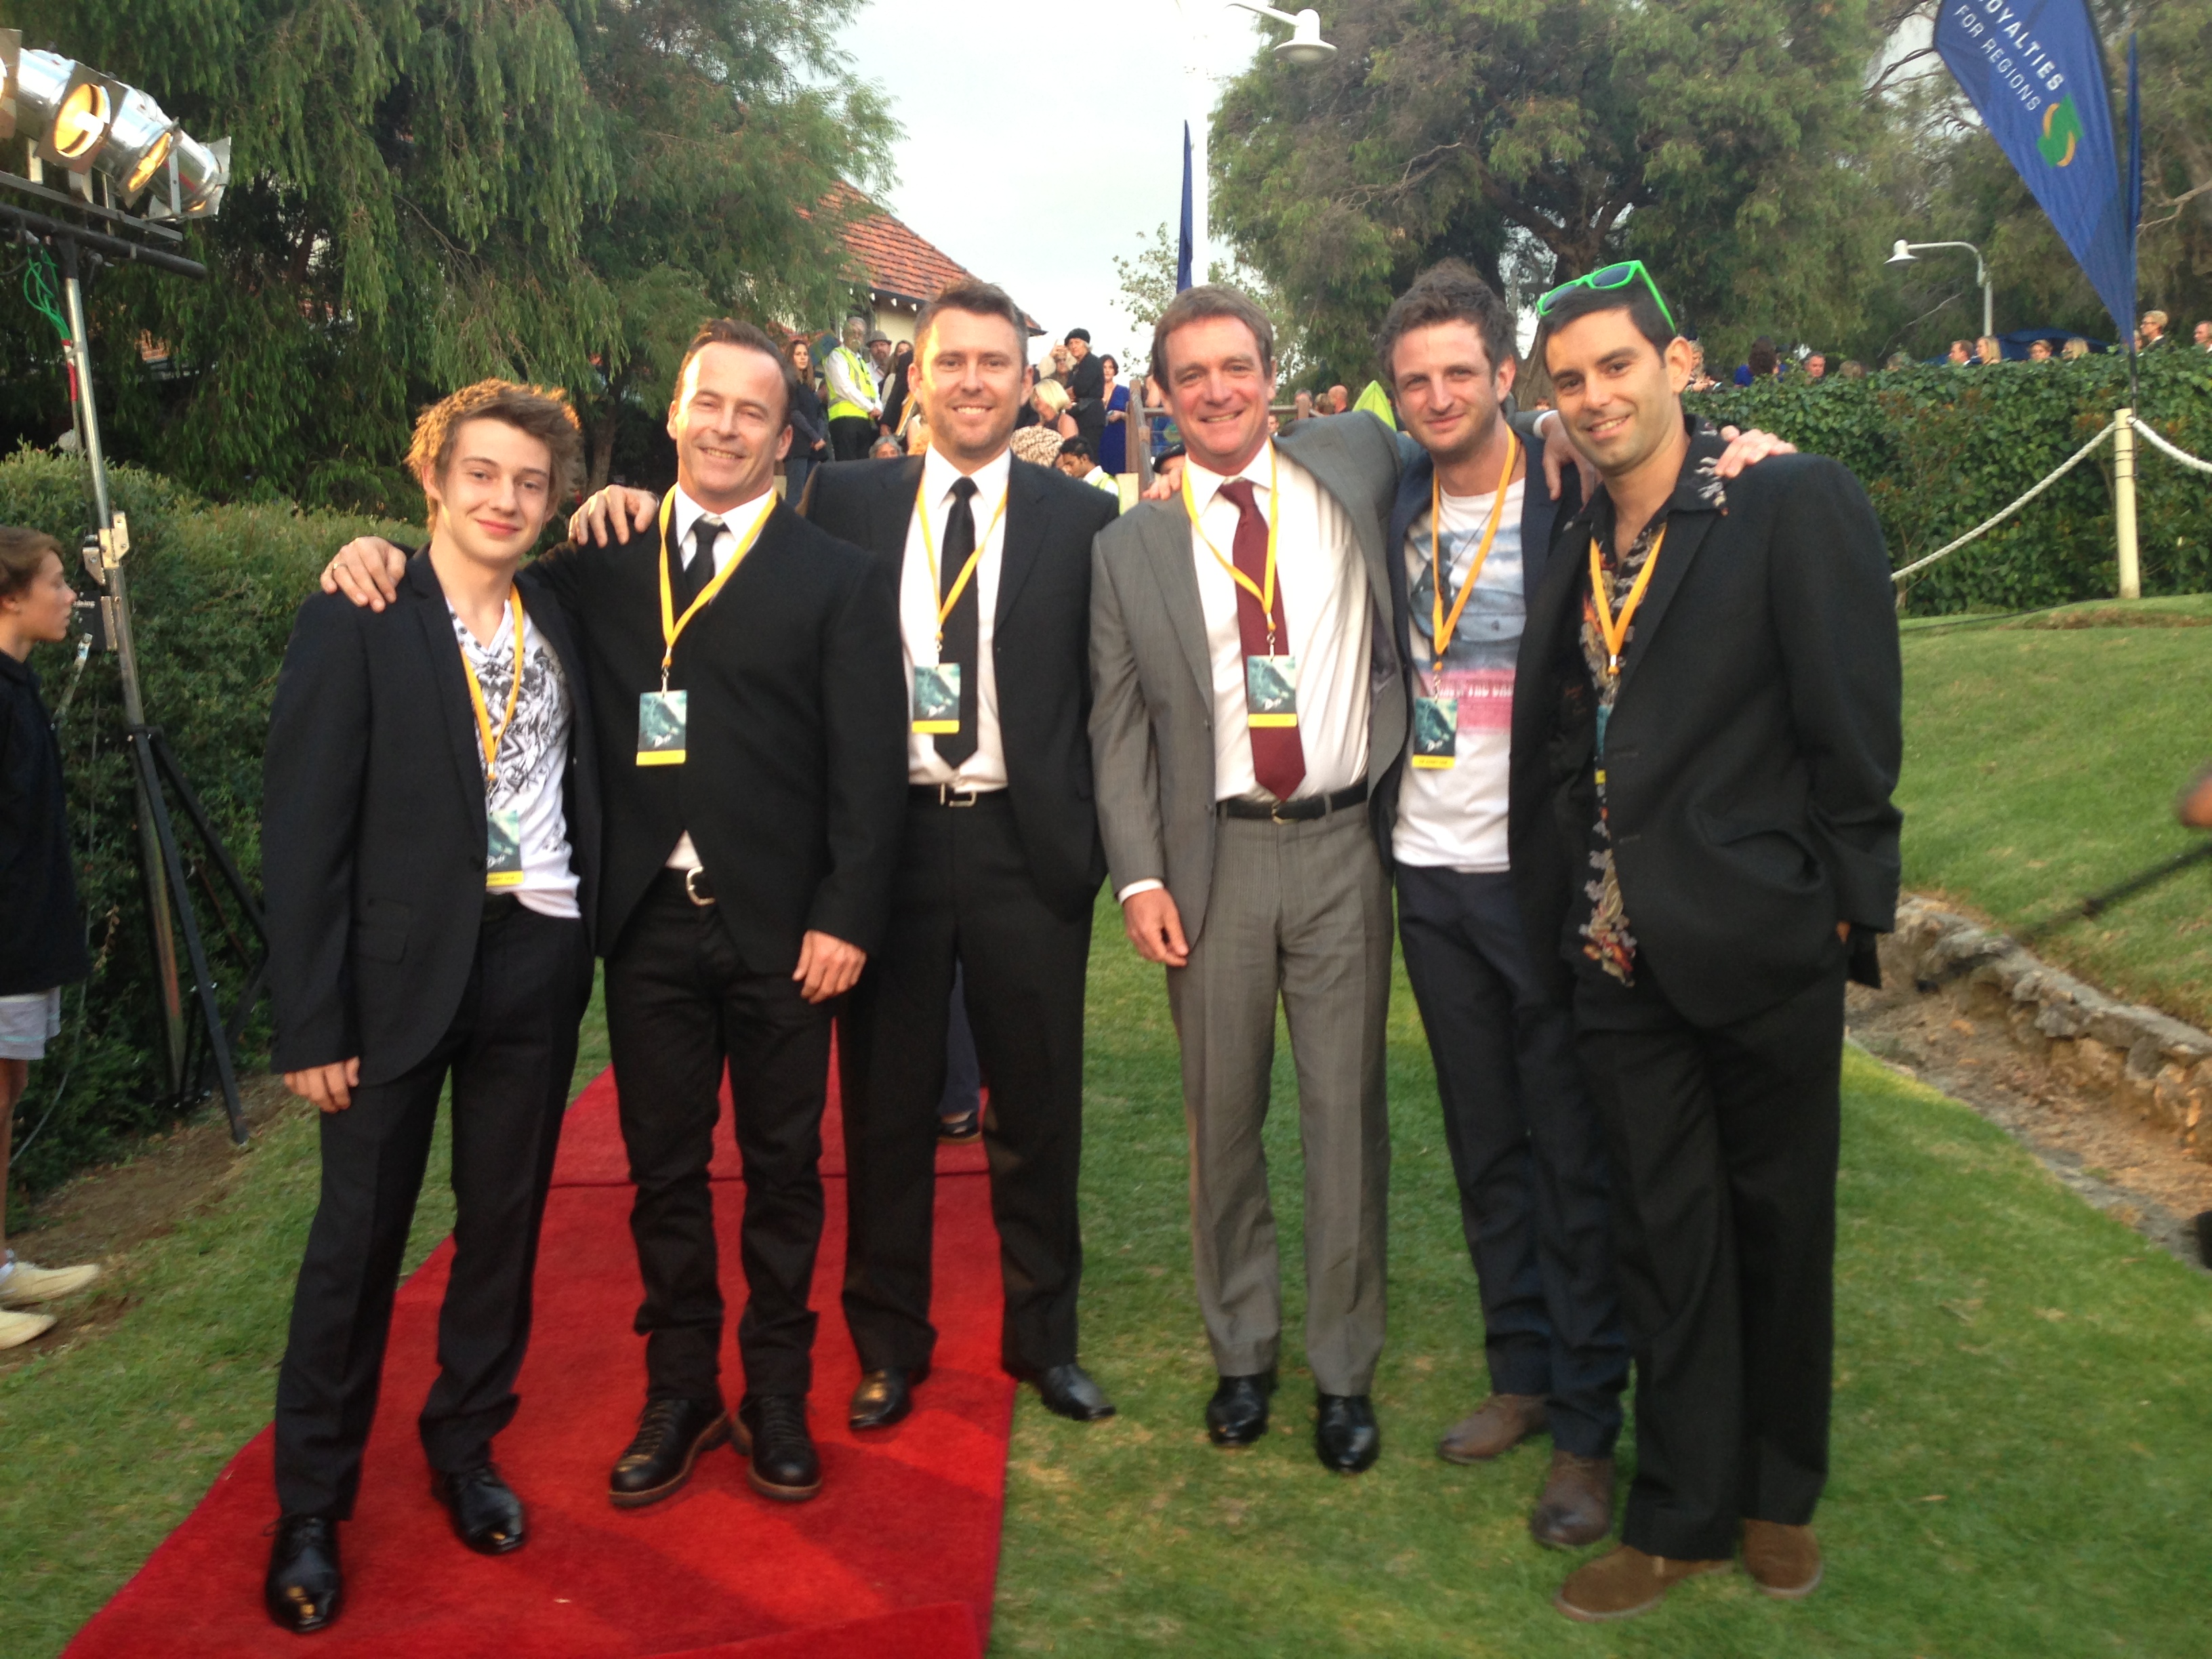 Harrison Buckland-Crook, Ben Nott, Morgan O'Niell, Tim Duffy and Ben Mortley at the Drift Premiere